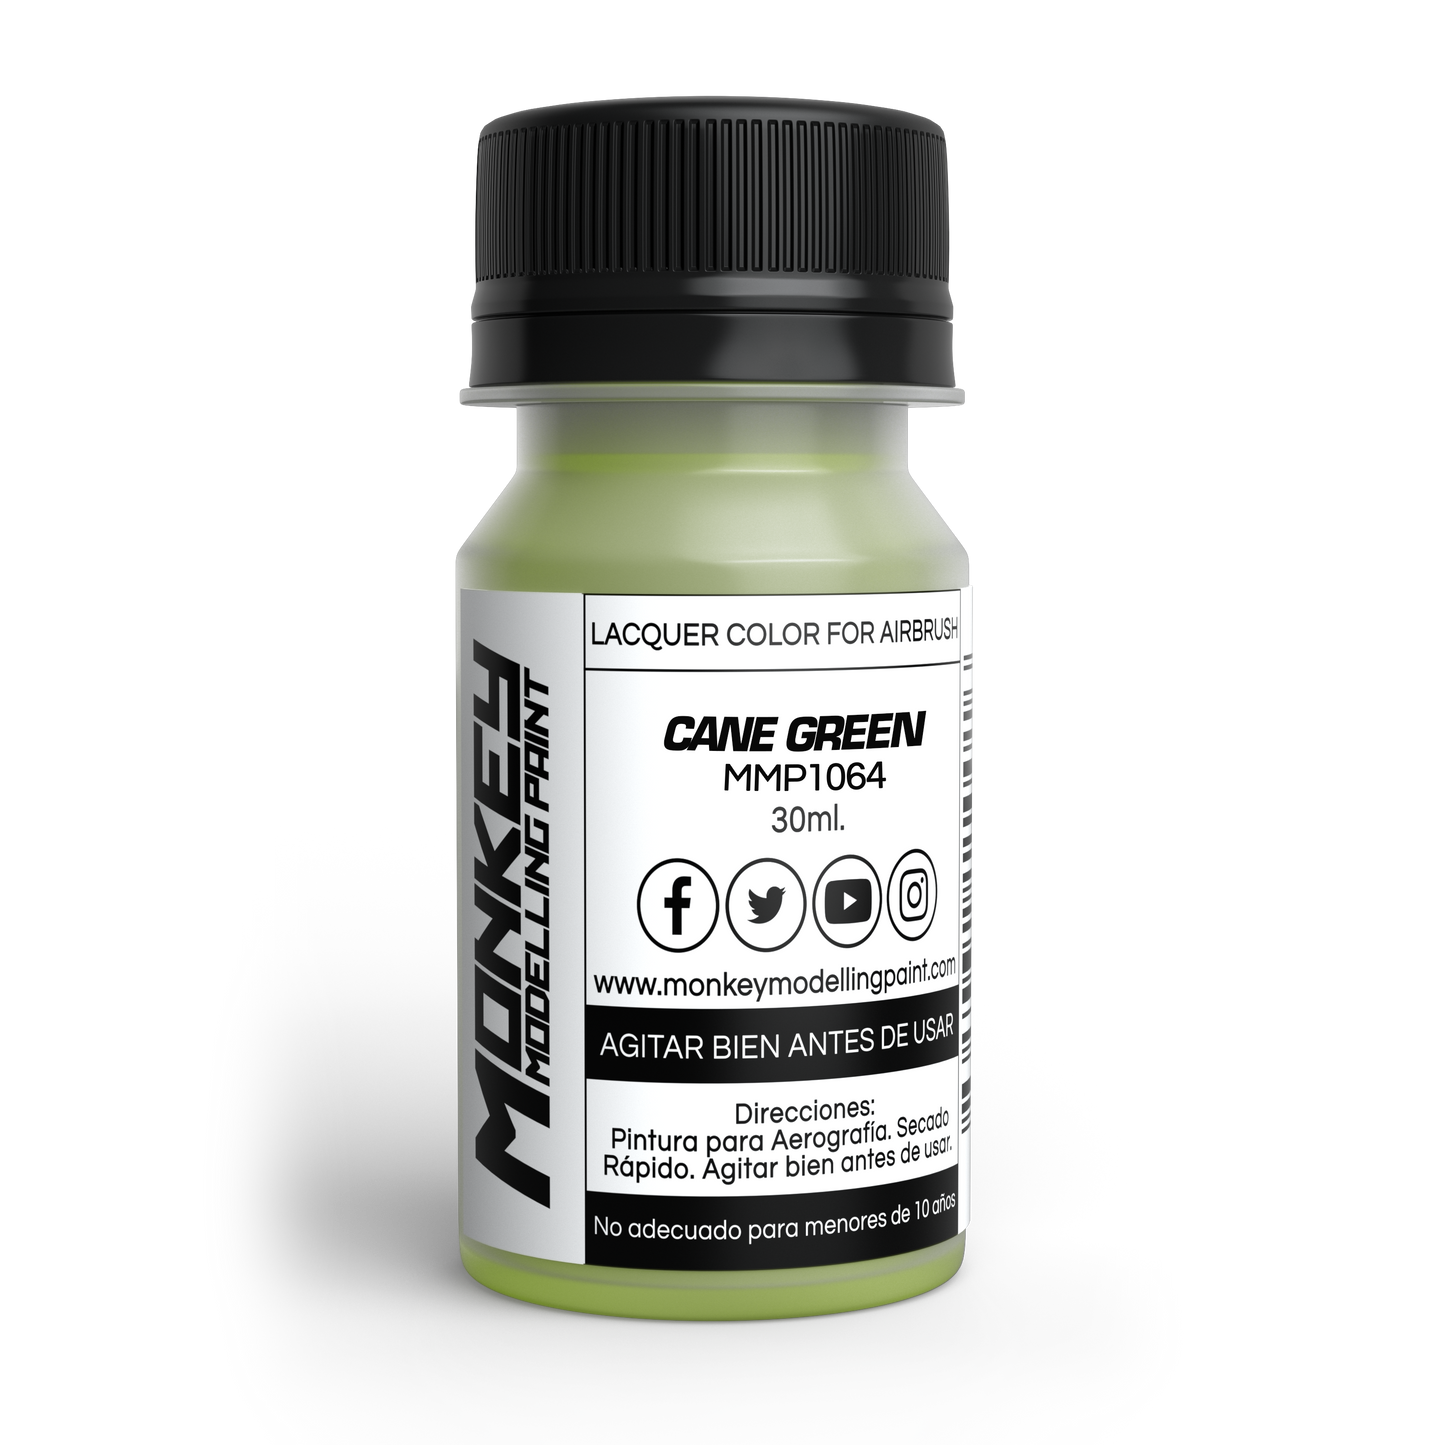 MMP CANE GREEN FOR AVIA S119